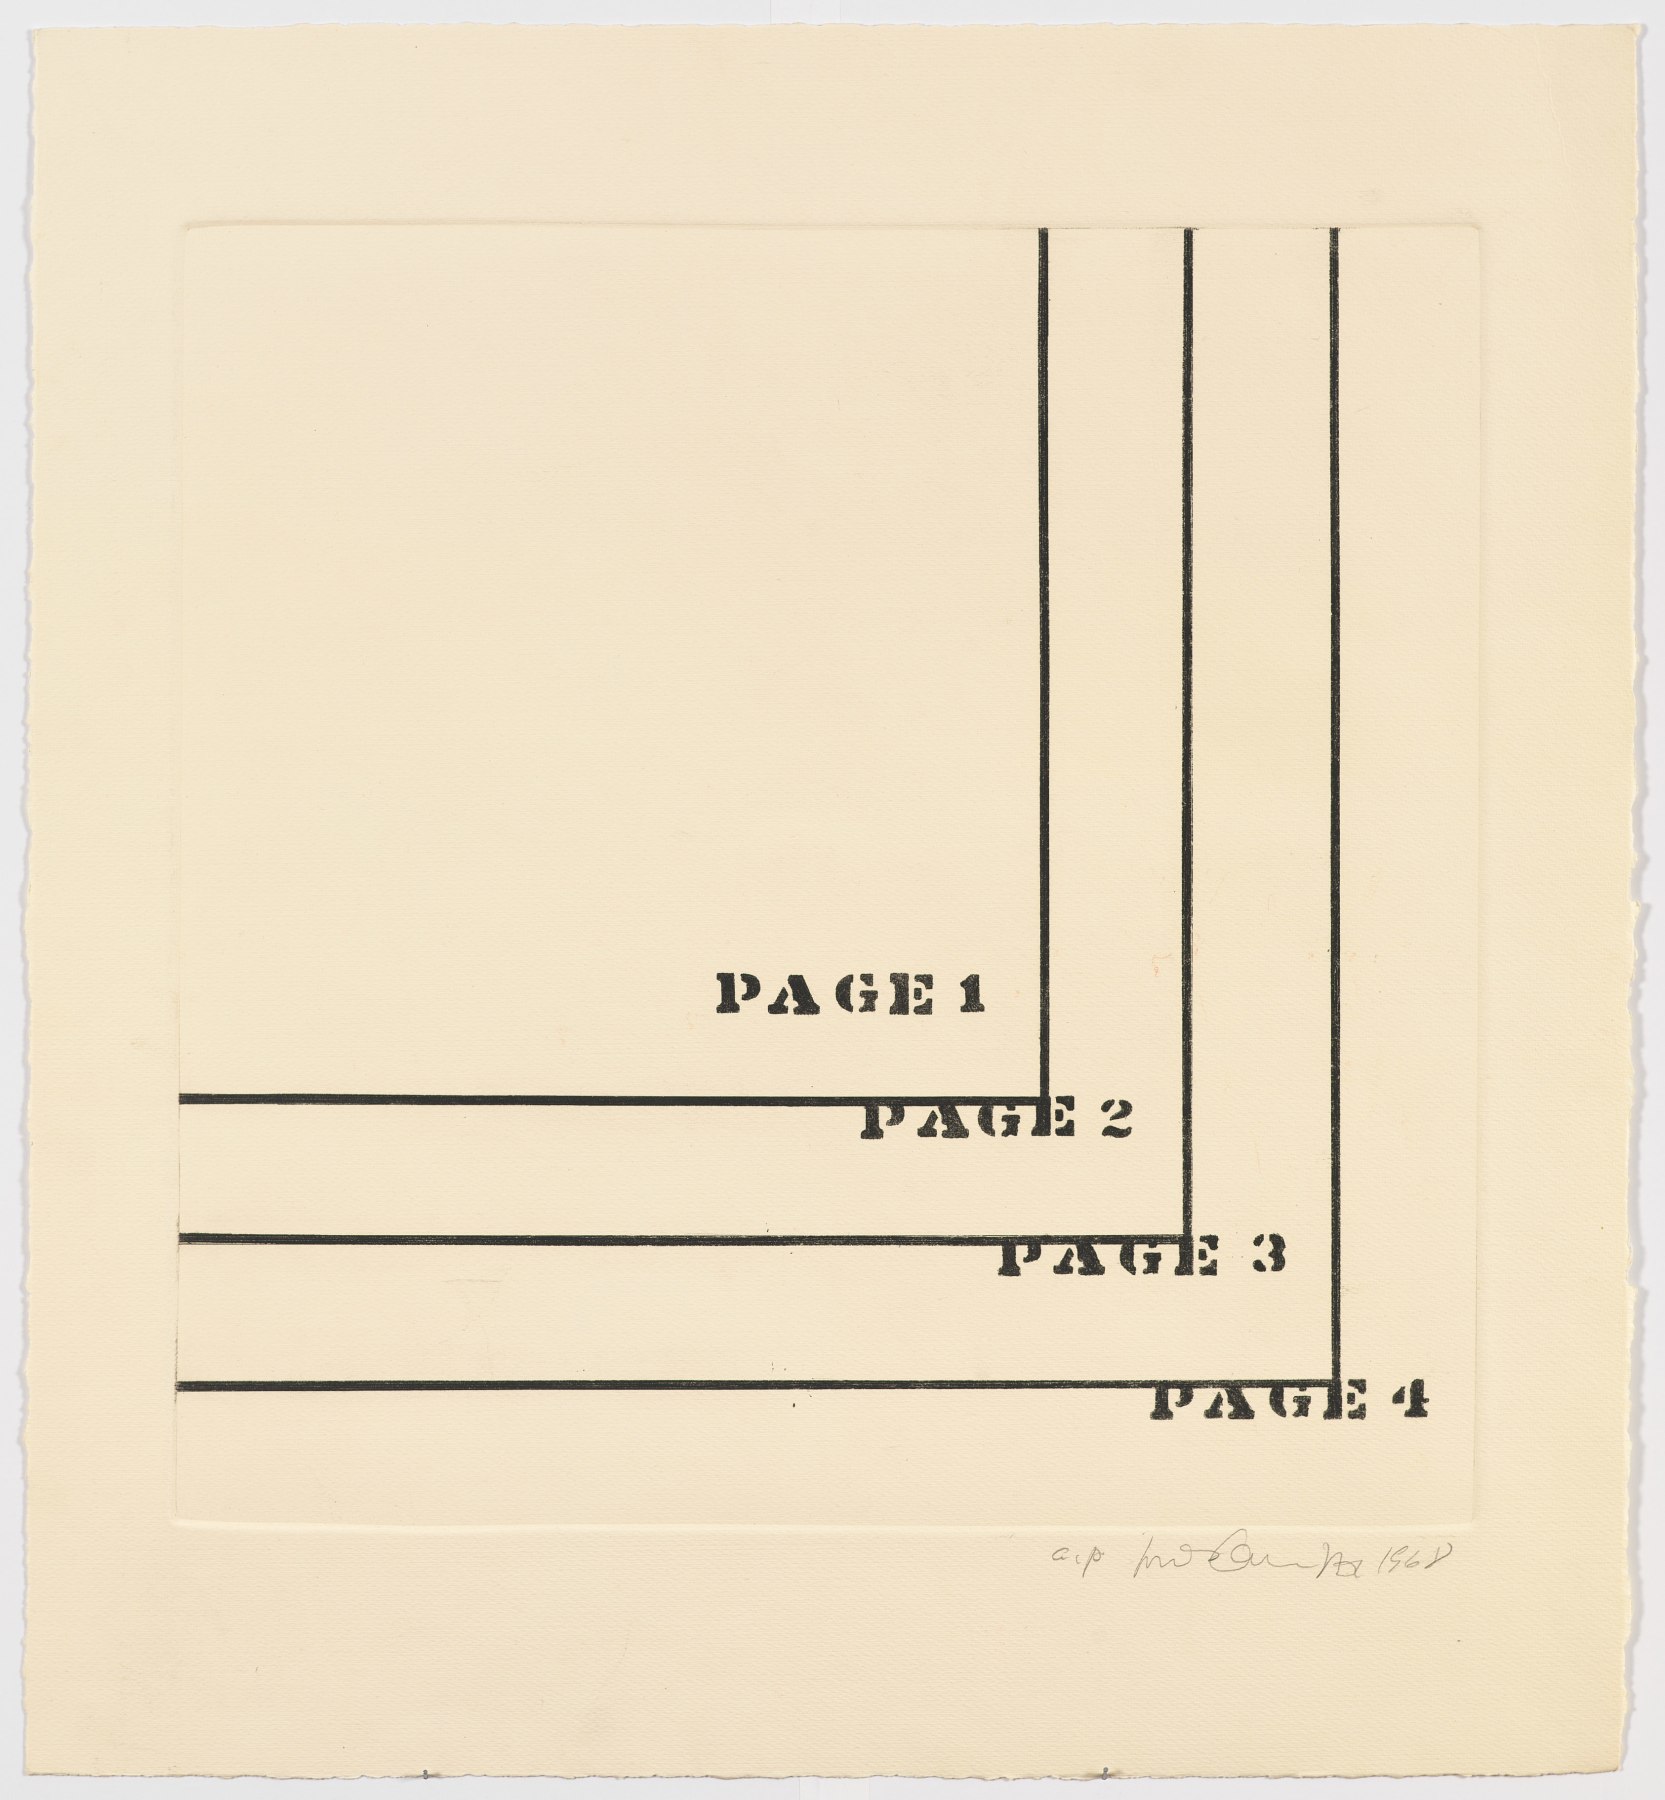 Luis Camnitzer, Four Pages, 1968